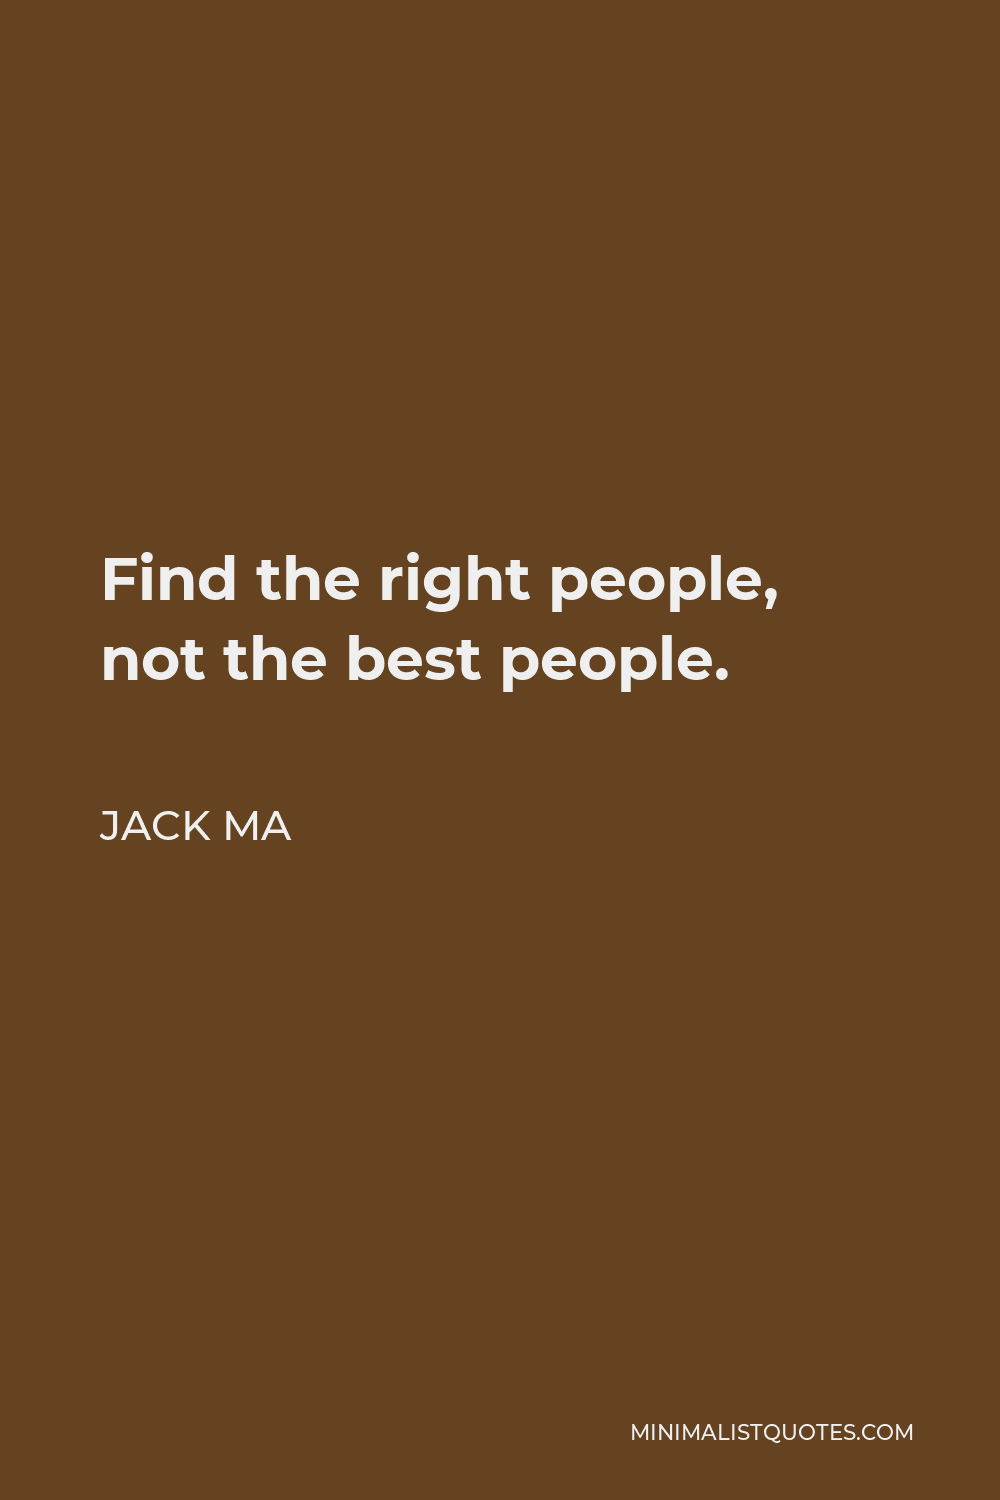 Jack Ma Quote - Find the right people, not the best people.